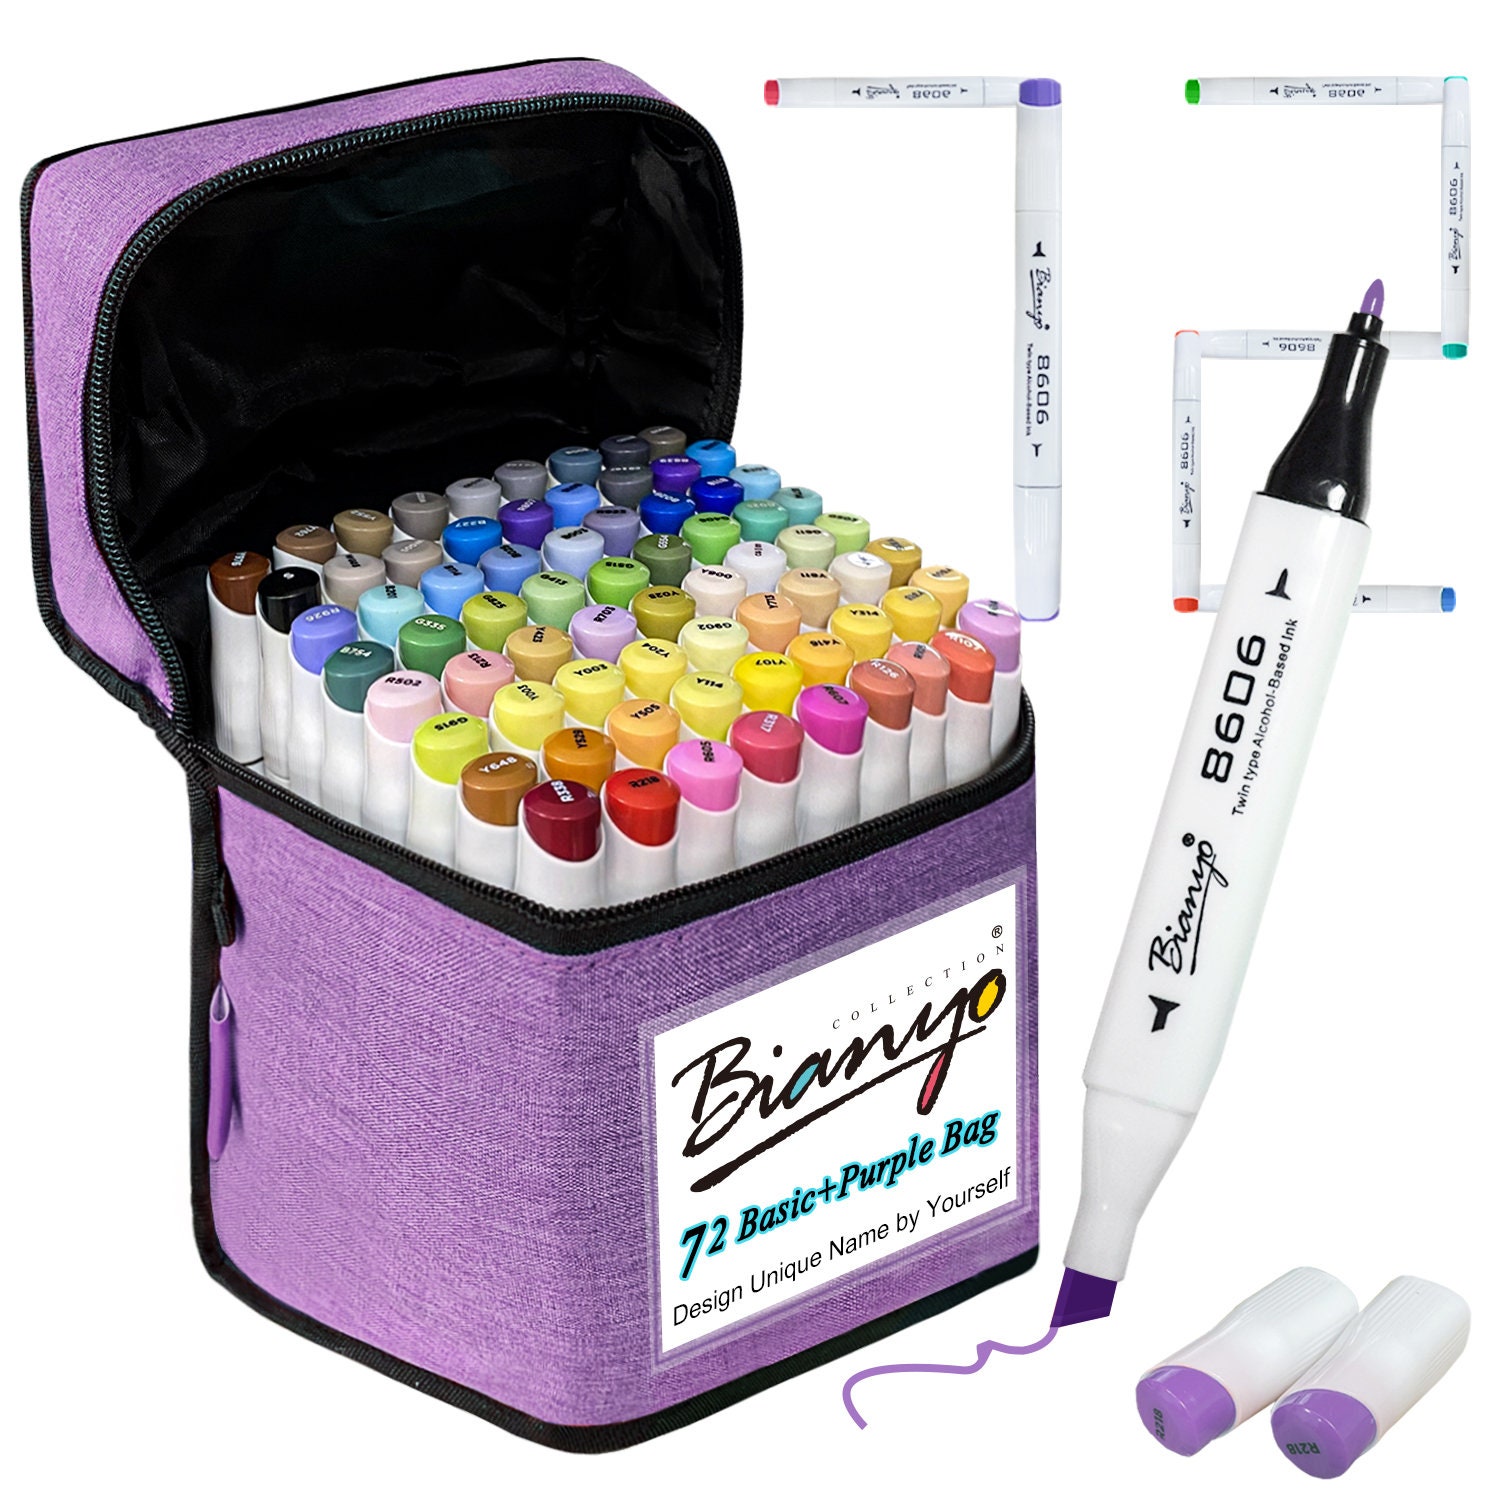 Marker Storage Case 120 Holders, Foldable Velcro Oxford Organizer with  Carrying Handle, Shoulder Strap and QR Buckle for Copic Markers, Sharpie  Marker, Dry Erase / Permanent Markers